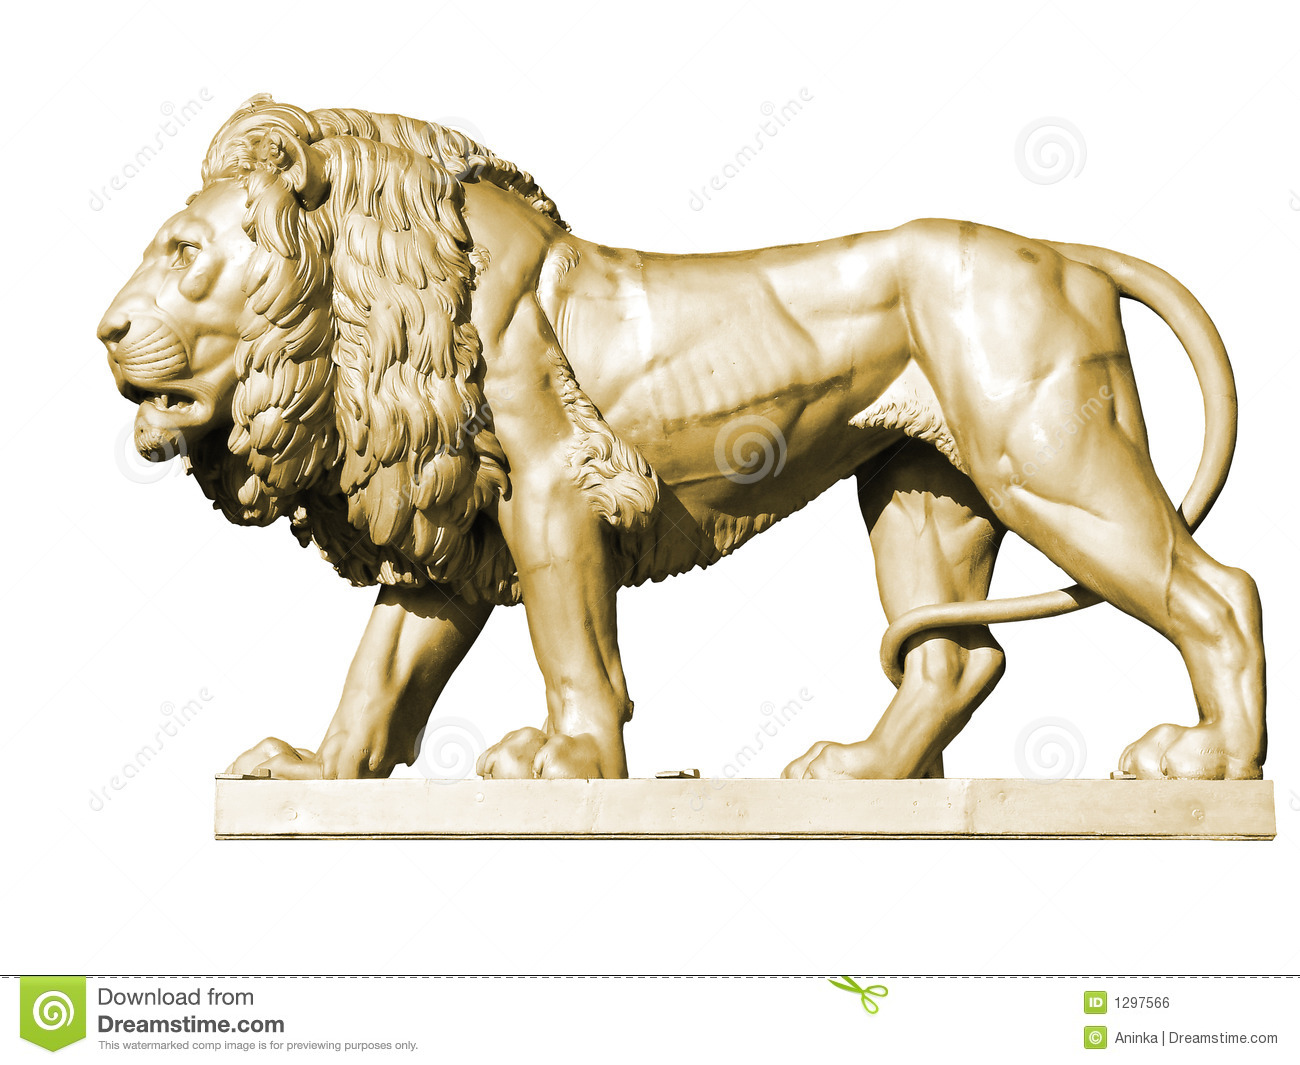 Lion Statue 3 Gold Royalty Free Stock Image   Image  1297566